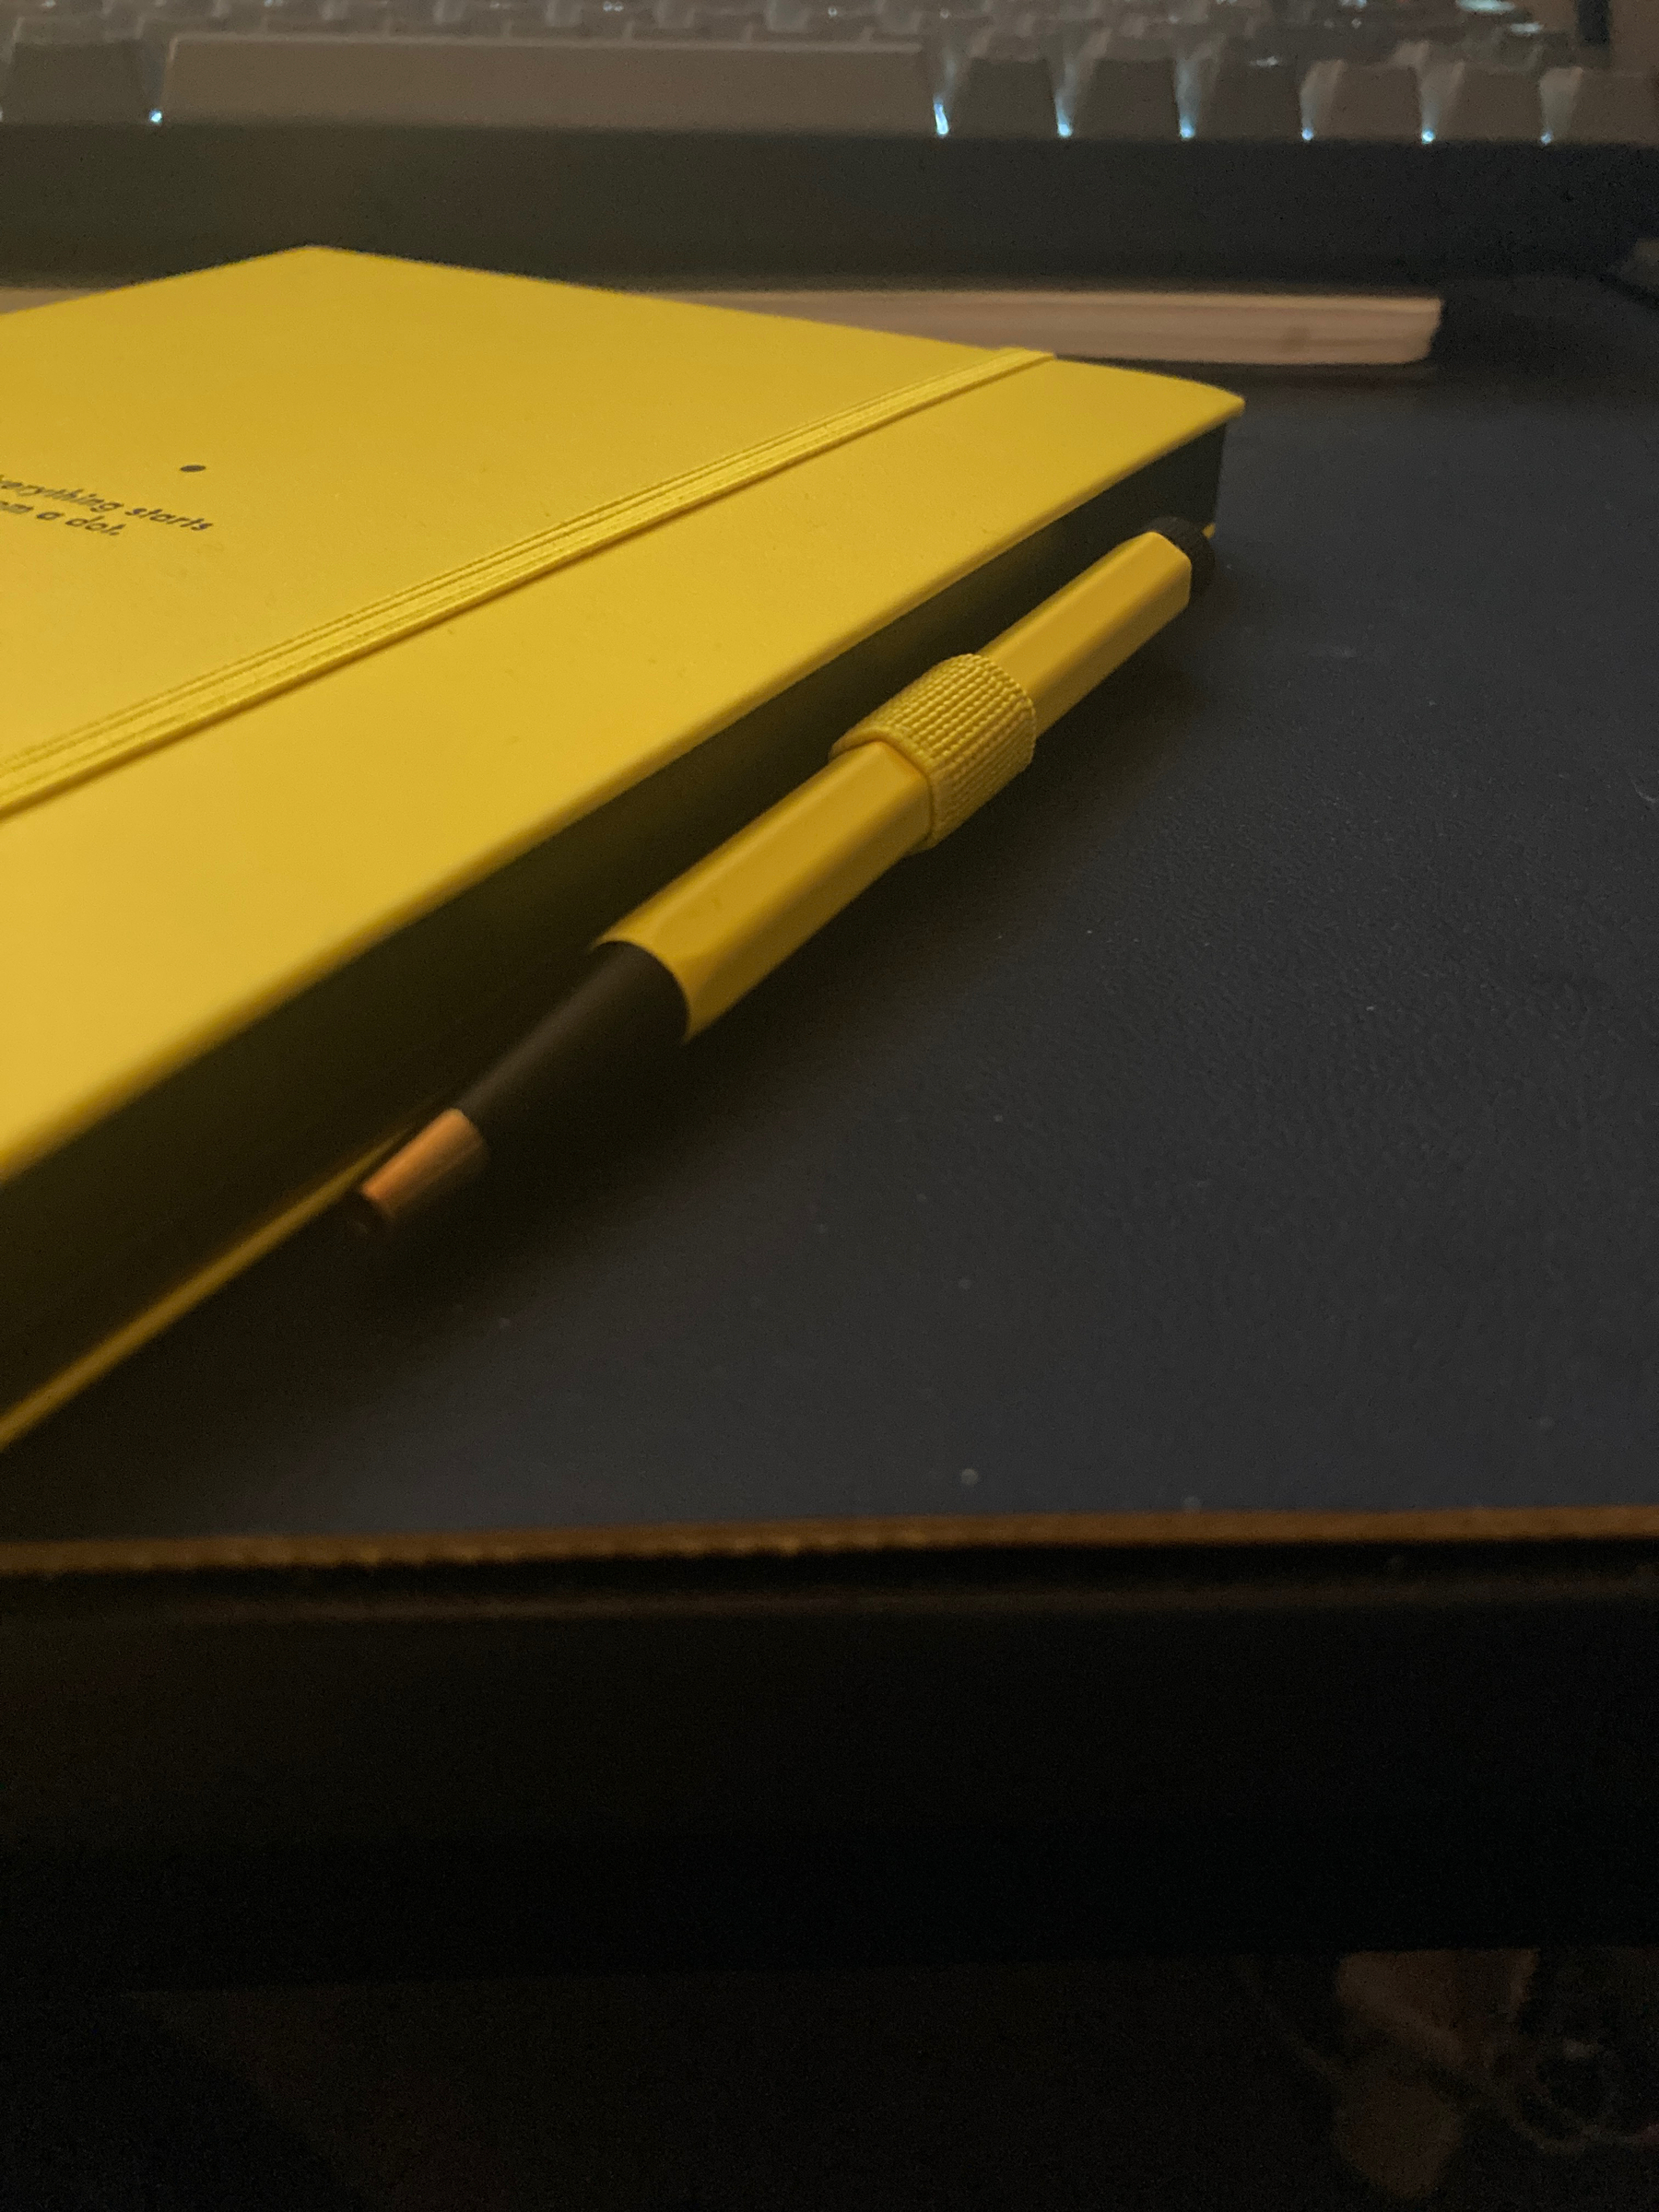 The side of a notebook, with a pen loop attached and filled with a colour-matching yellow pen.